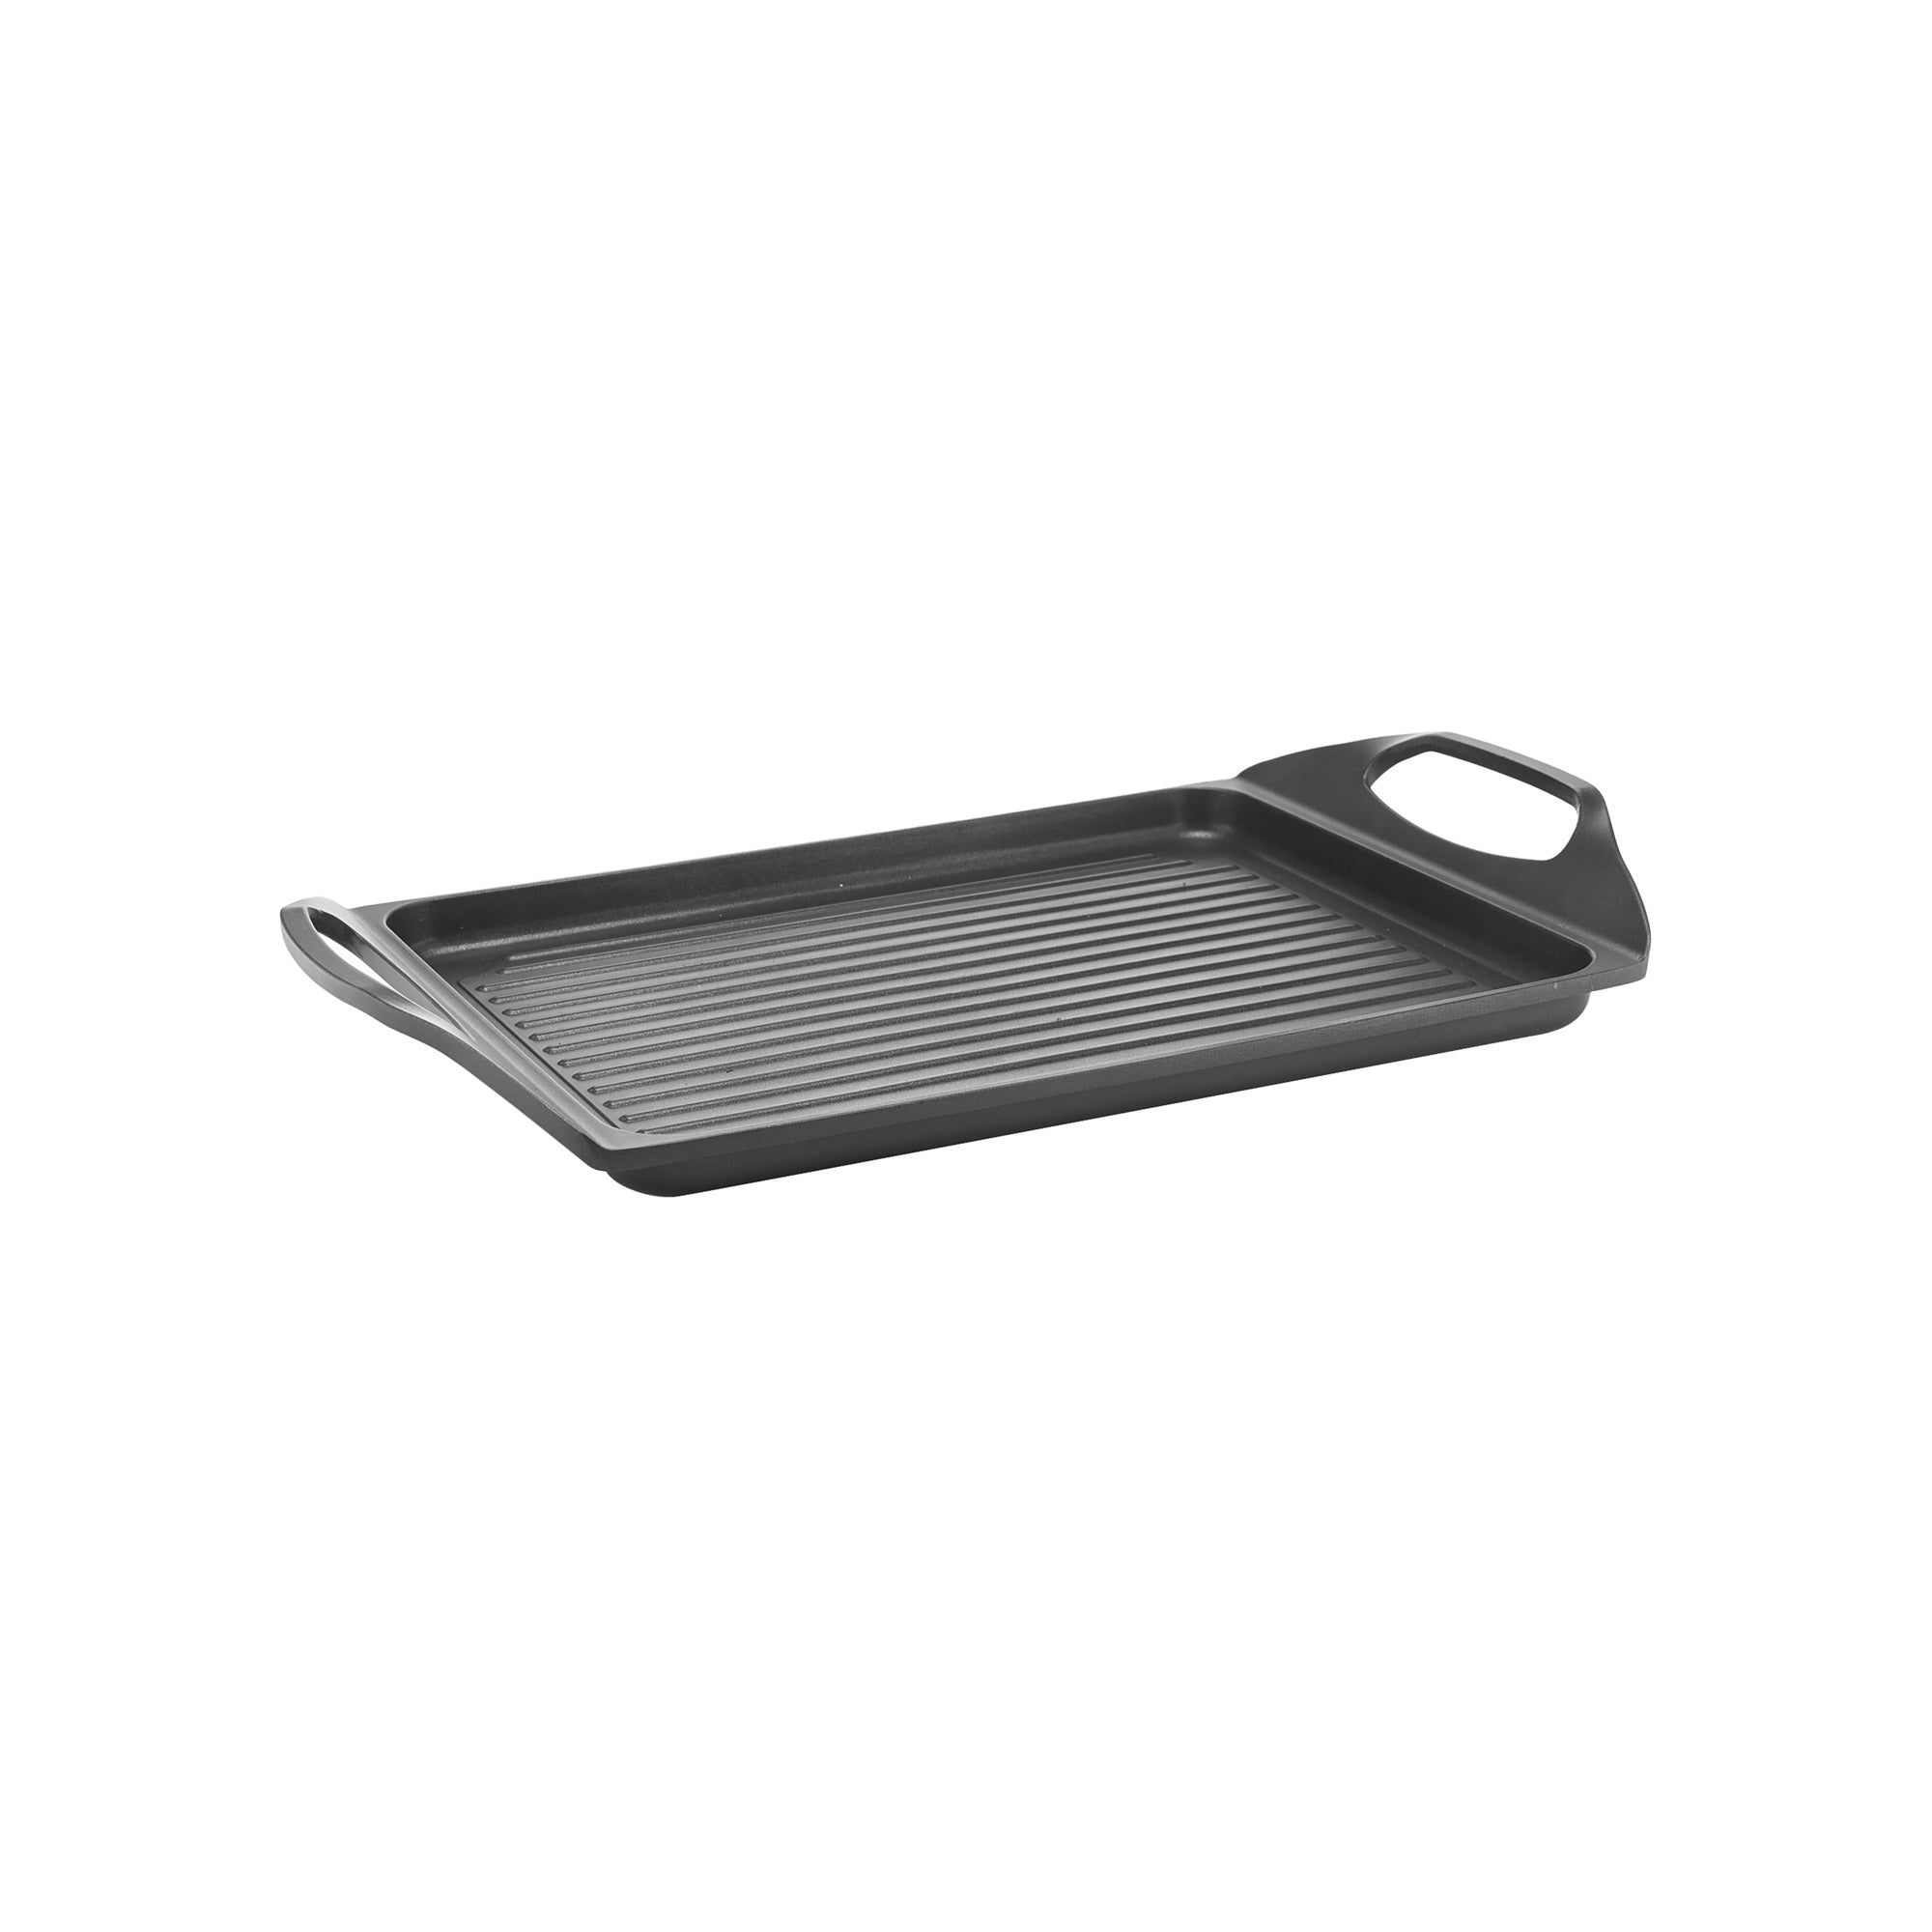 GRIDDLE PAN 45 X 26 CM "COOK&SPACE"